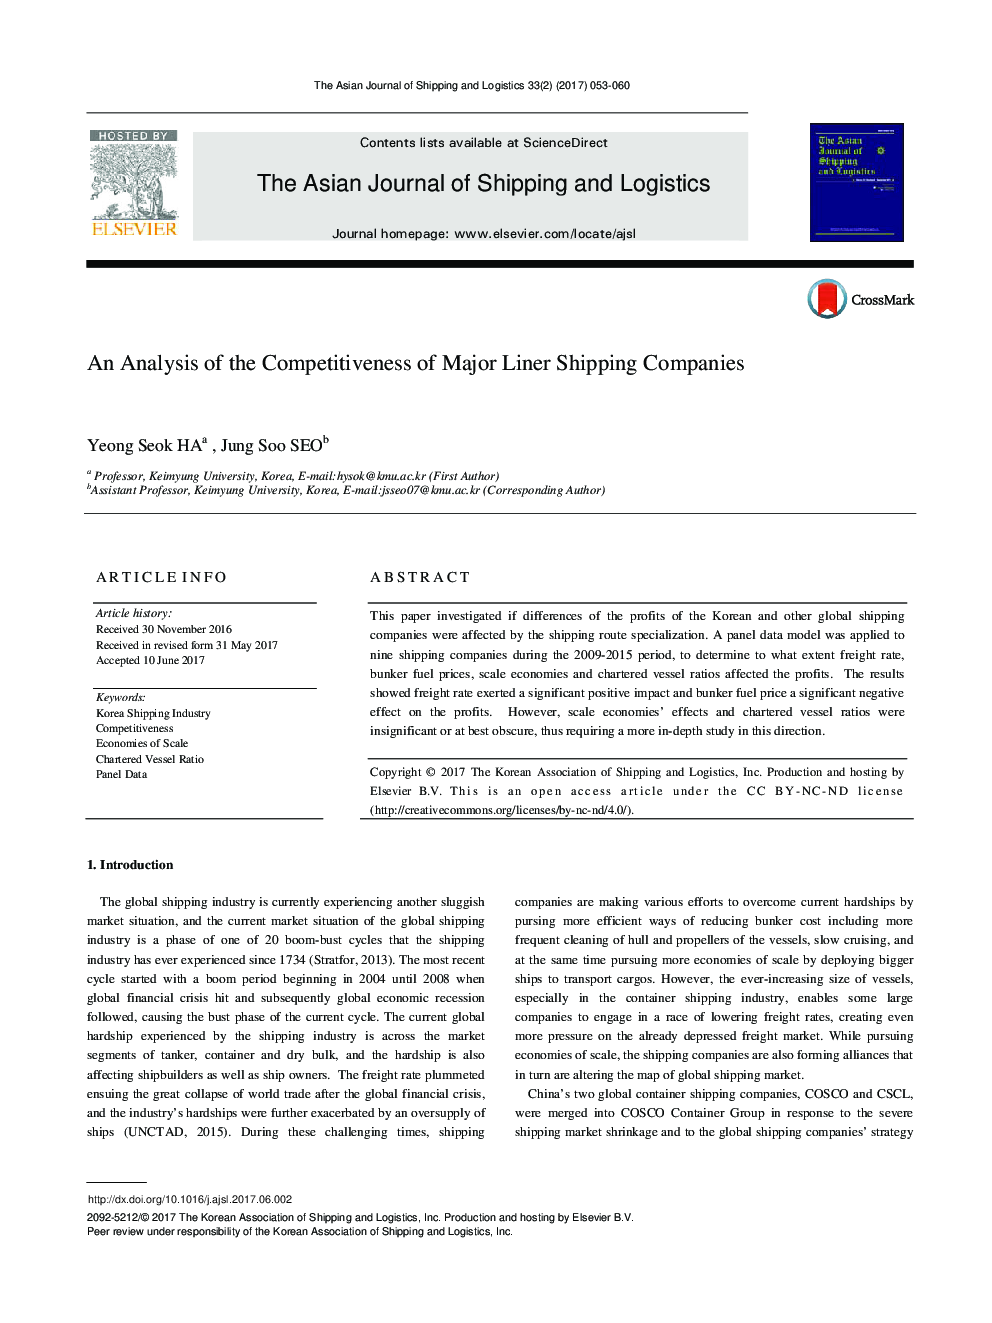 An Analysis of the Competitiveness of Major Liner Shipping Companies